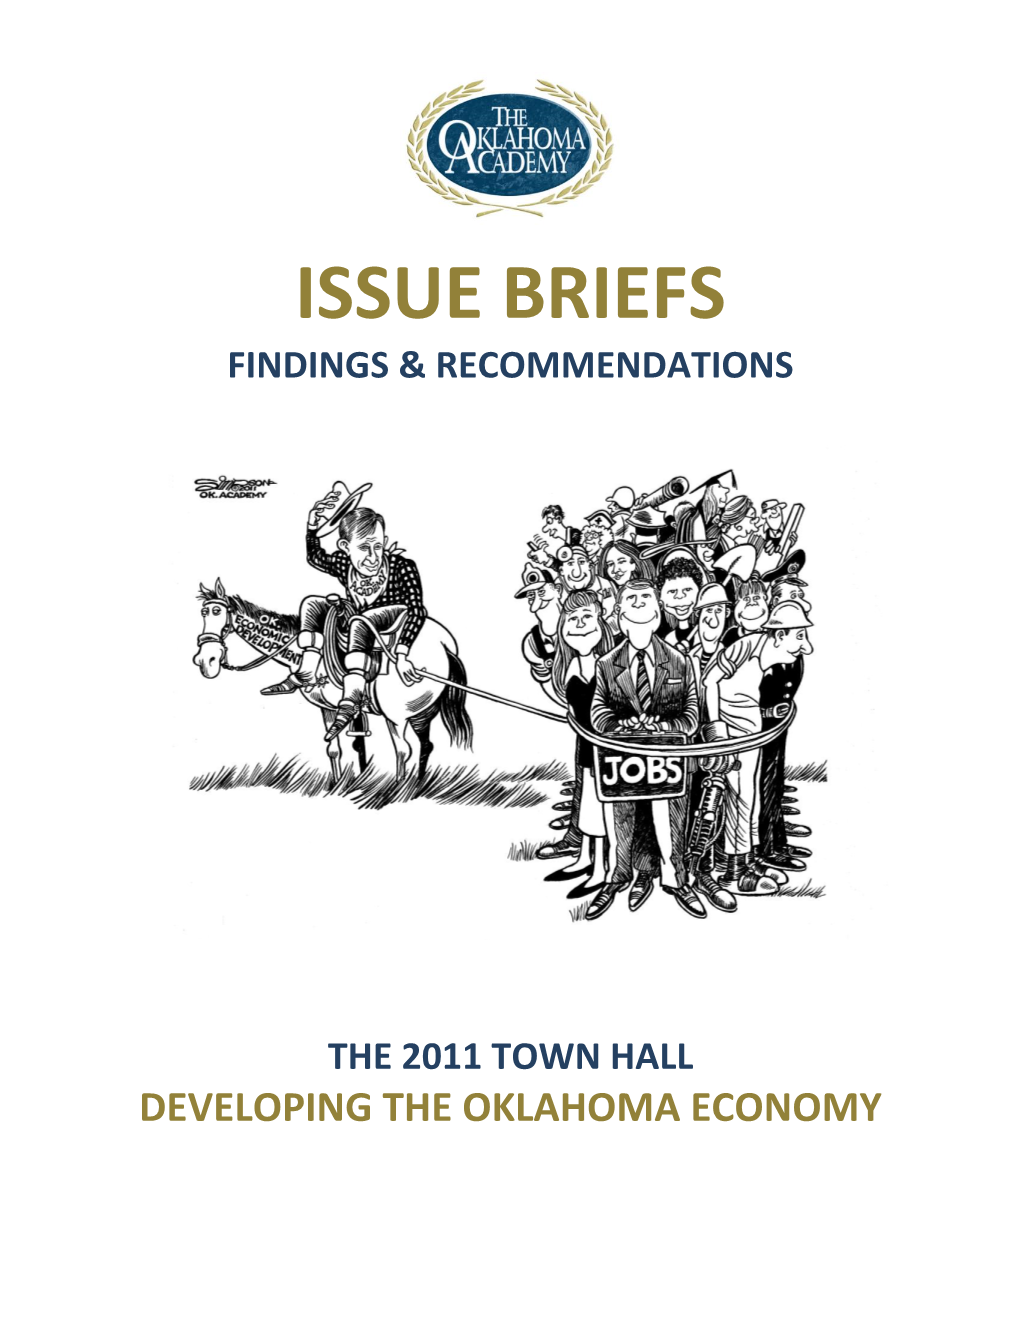 Issue Briefs Findings & Recommendations